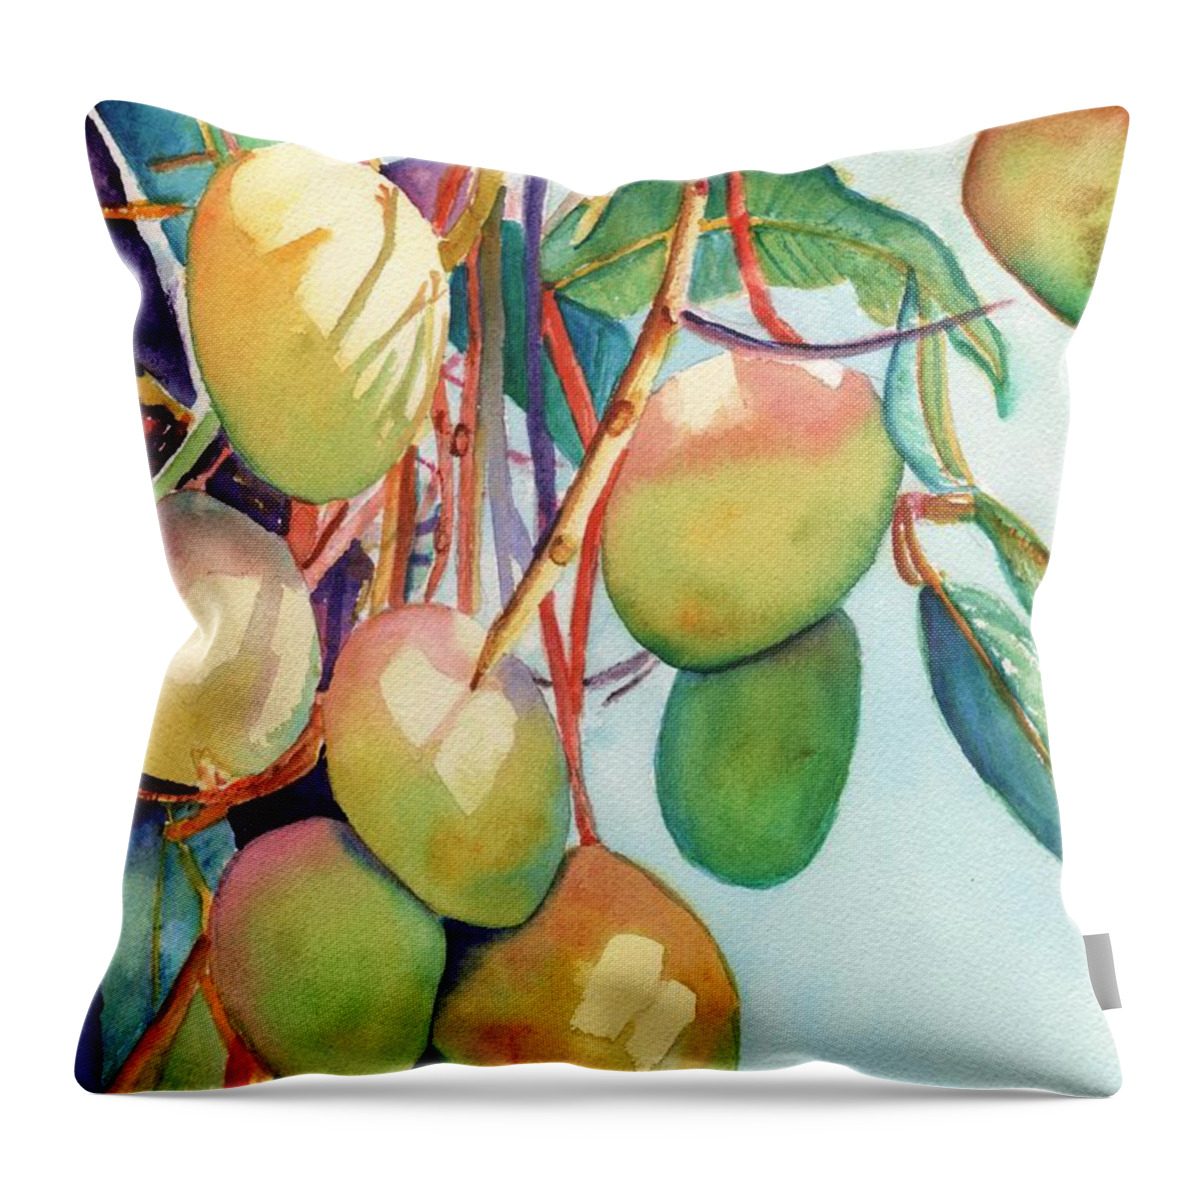 Mango Throw Pillow featuring the painting Mangoes by Marionette Taboniar